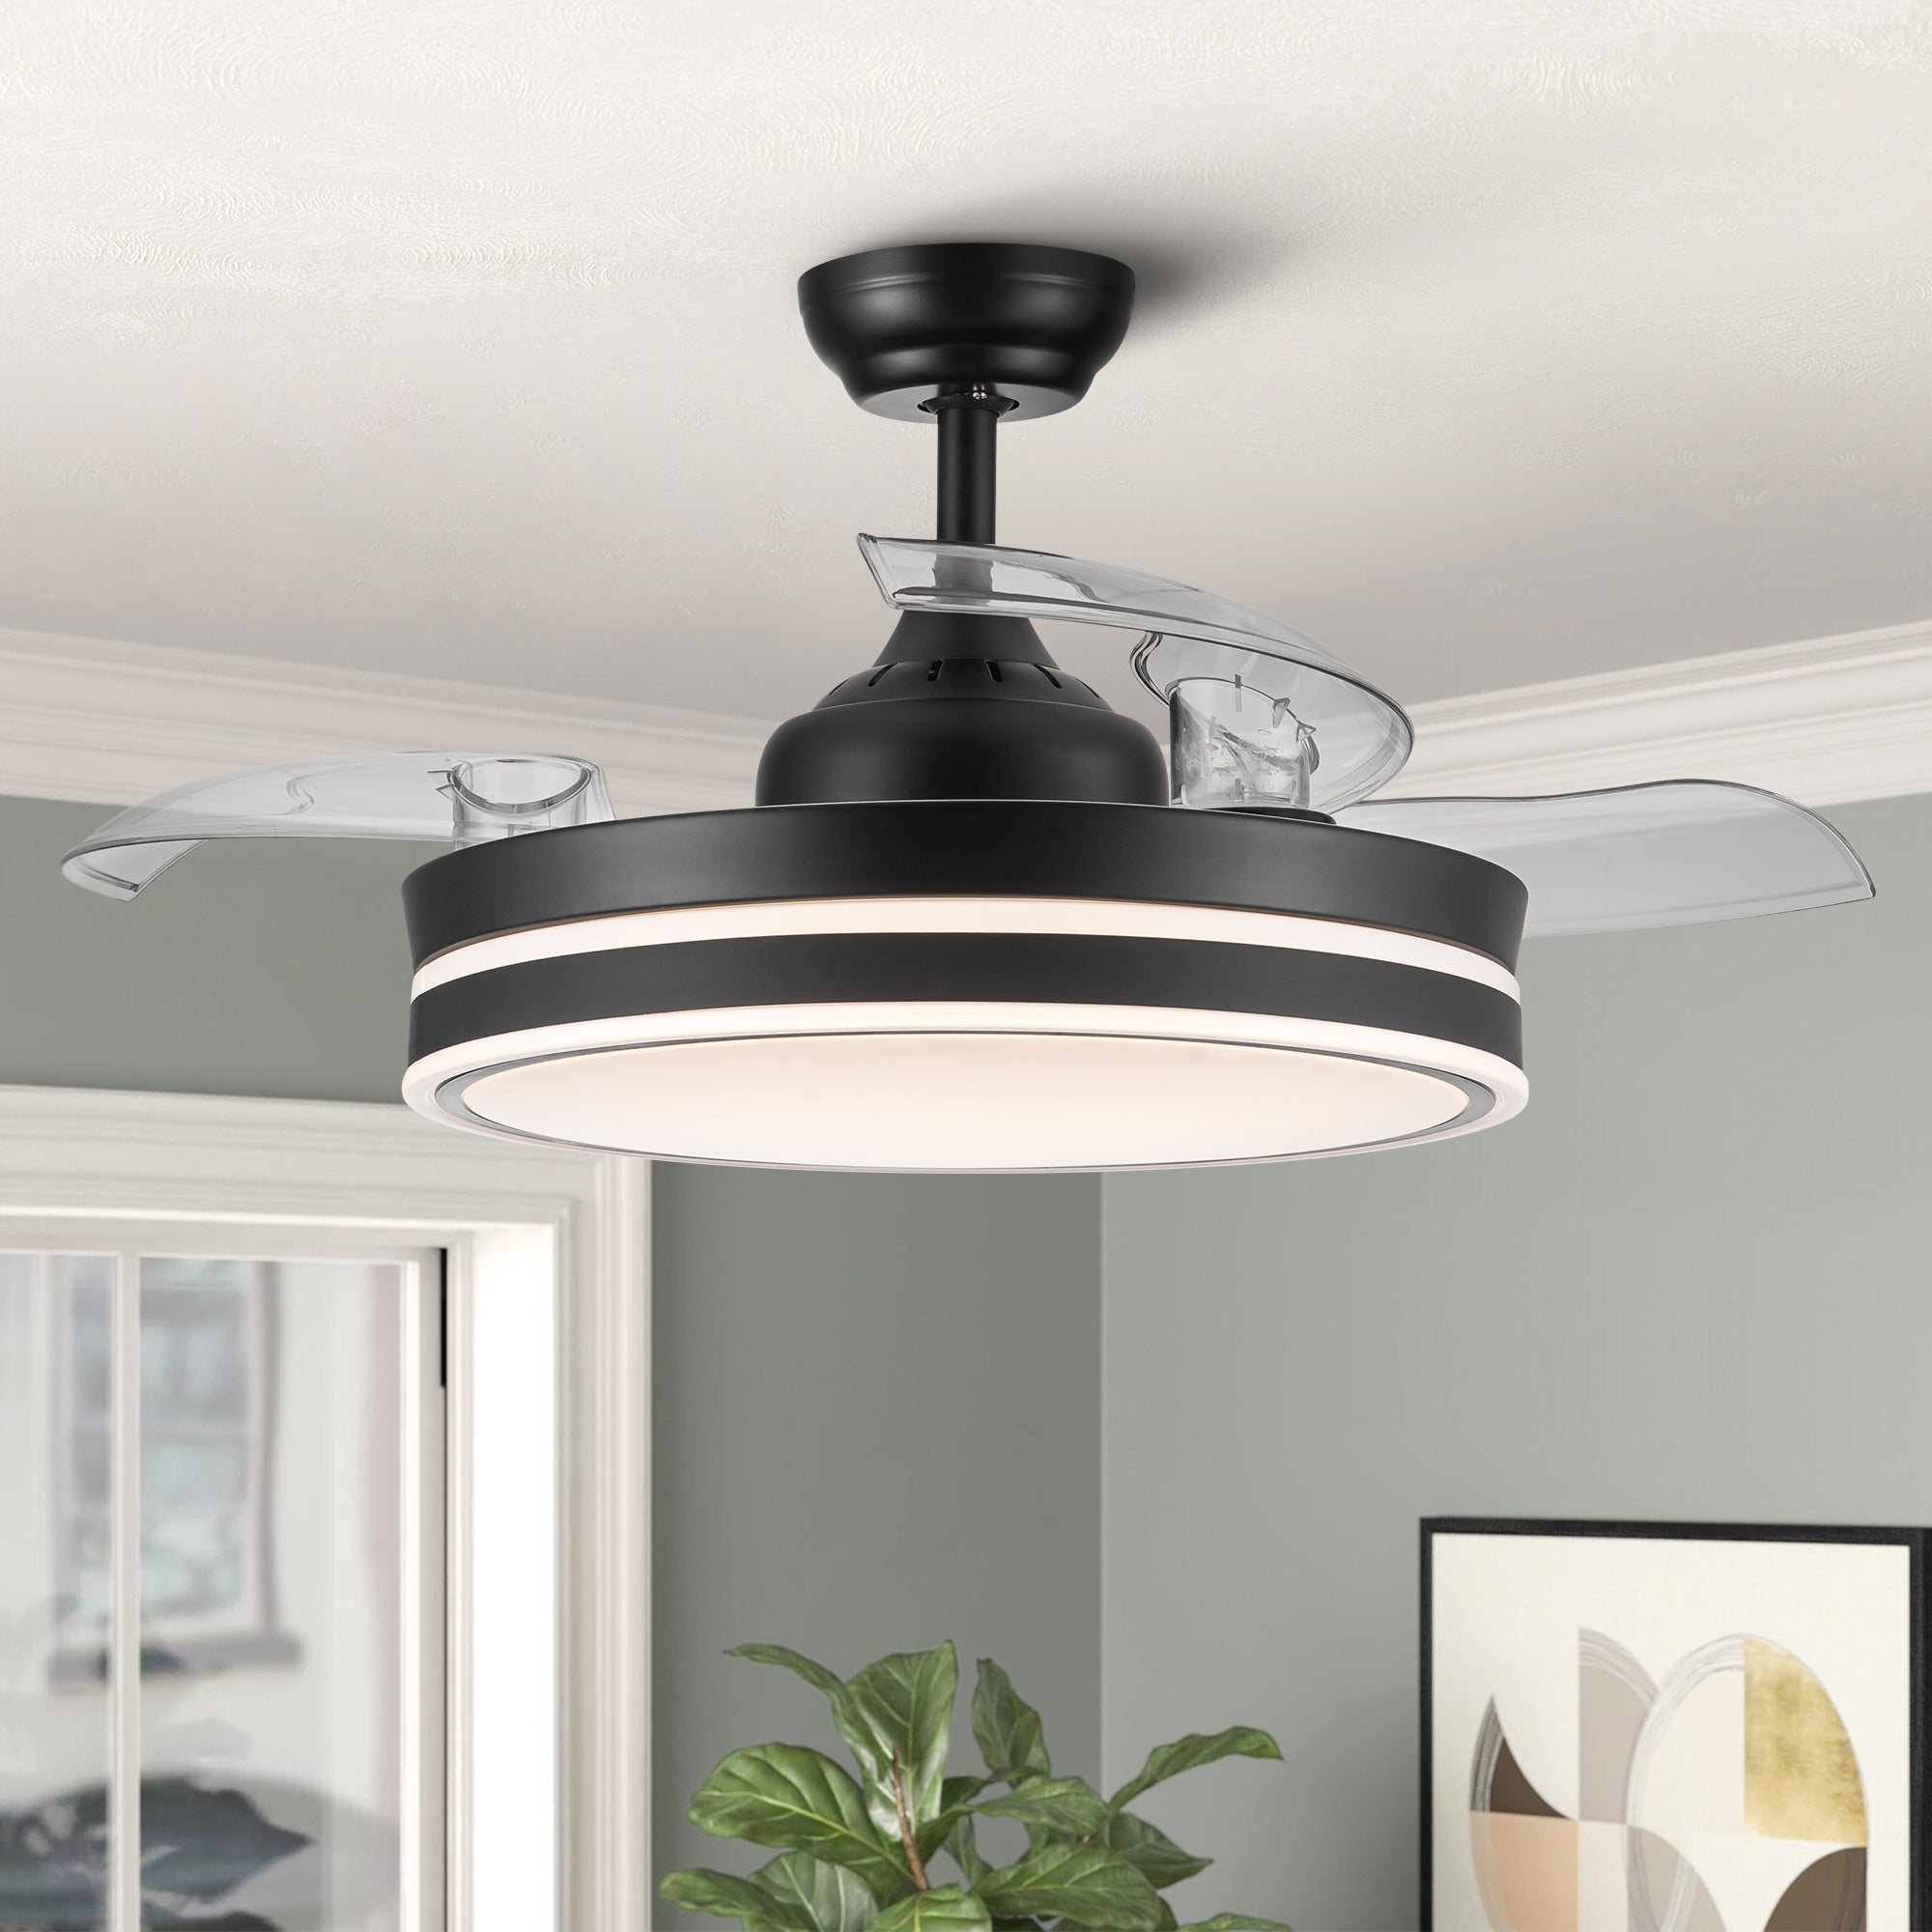 ZNTS 42 in. Black Frame Retractable Ceiling Fan with Remote Control W136780792